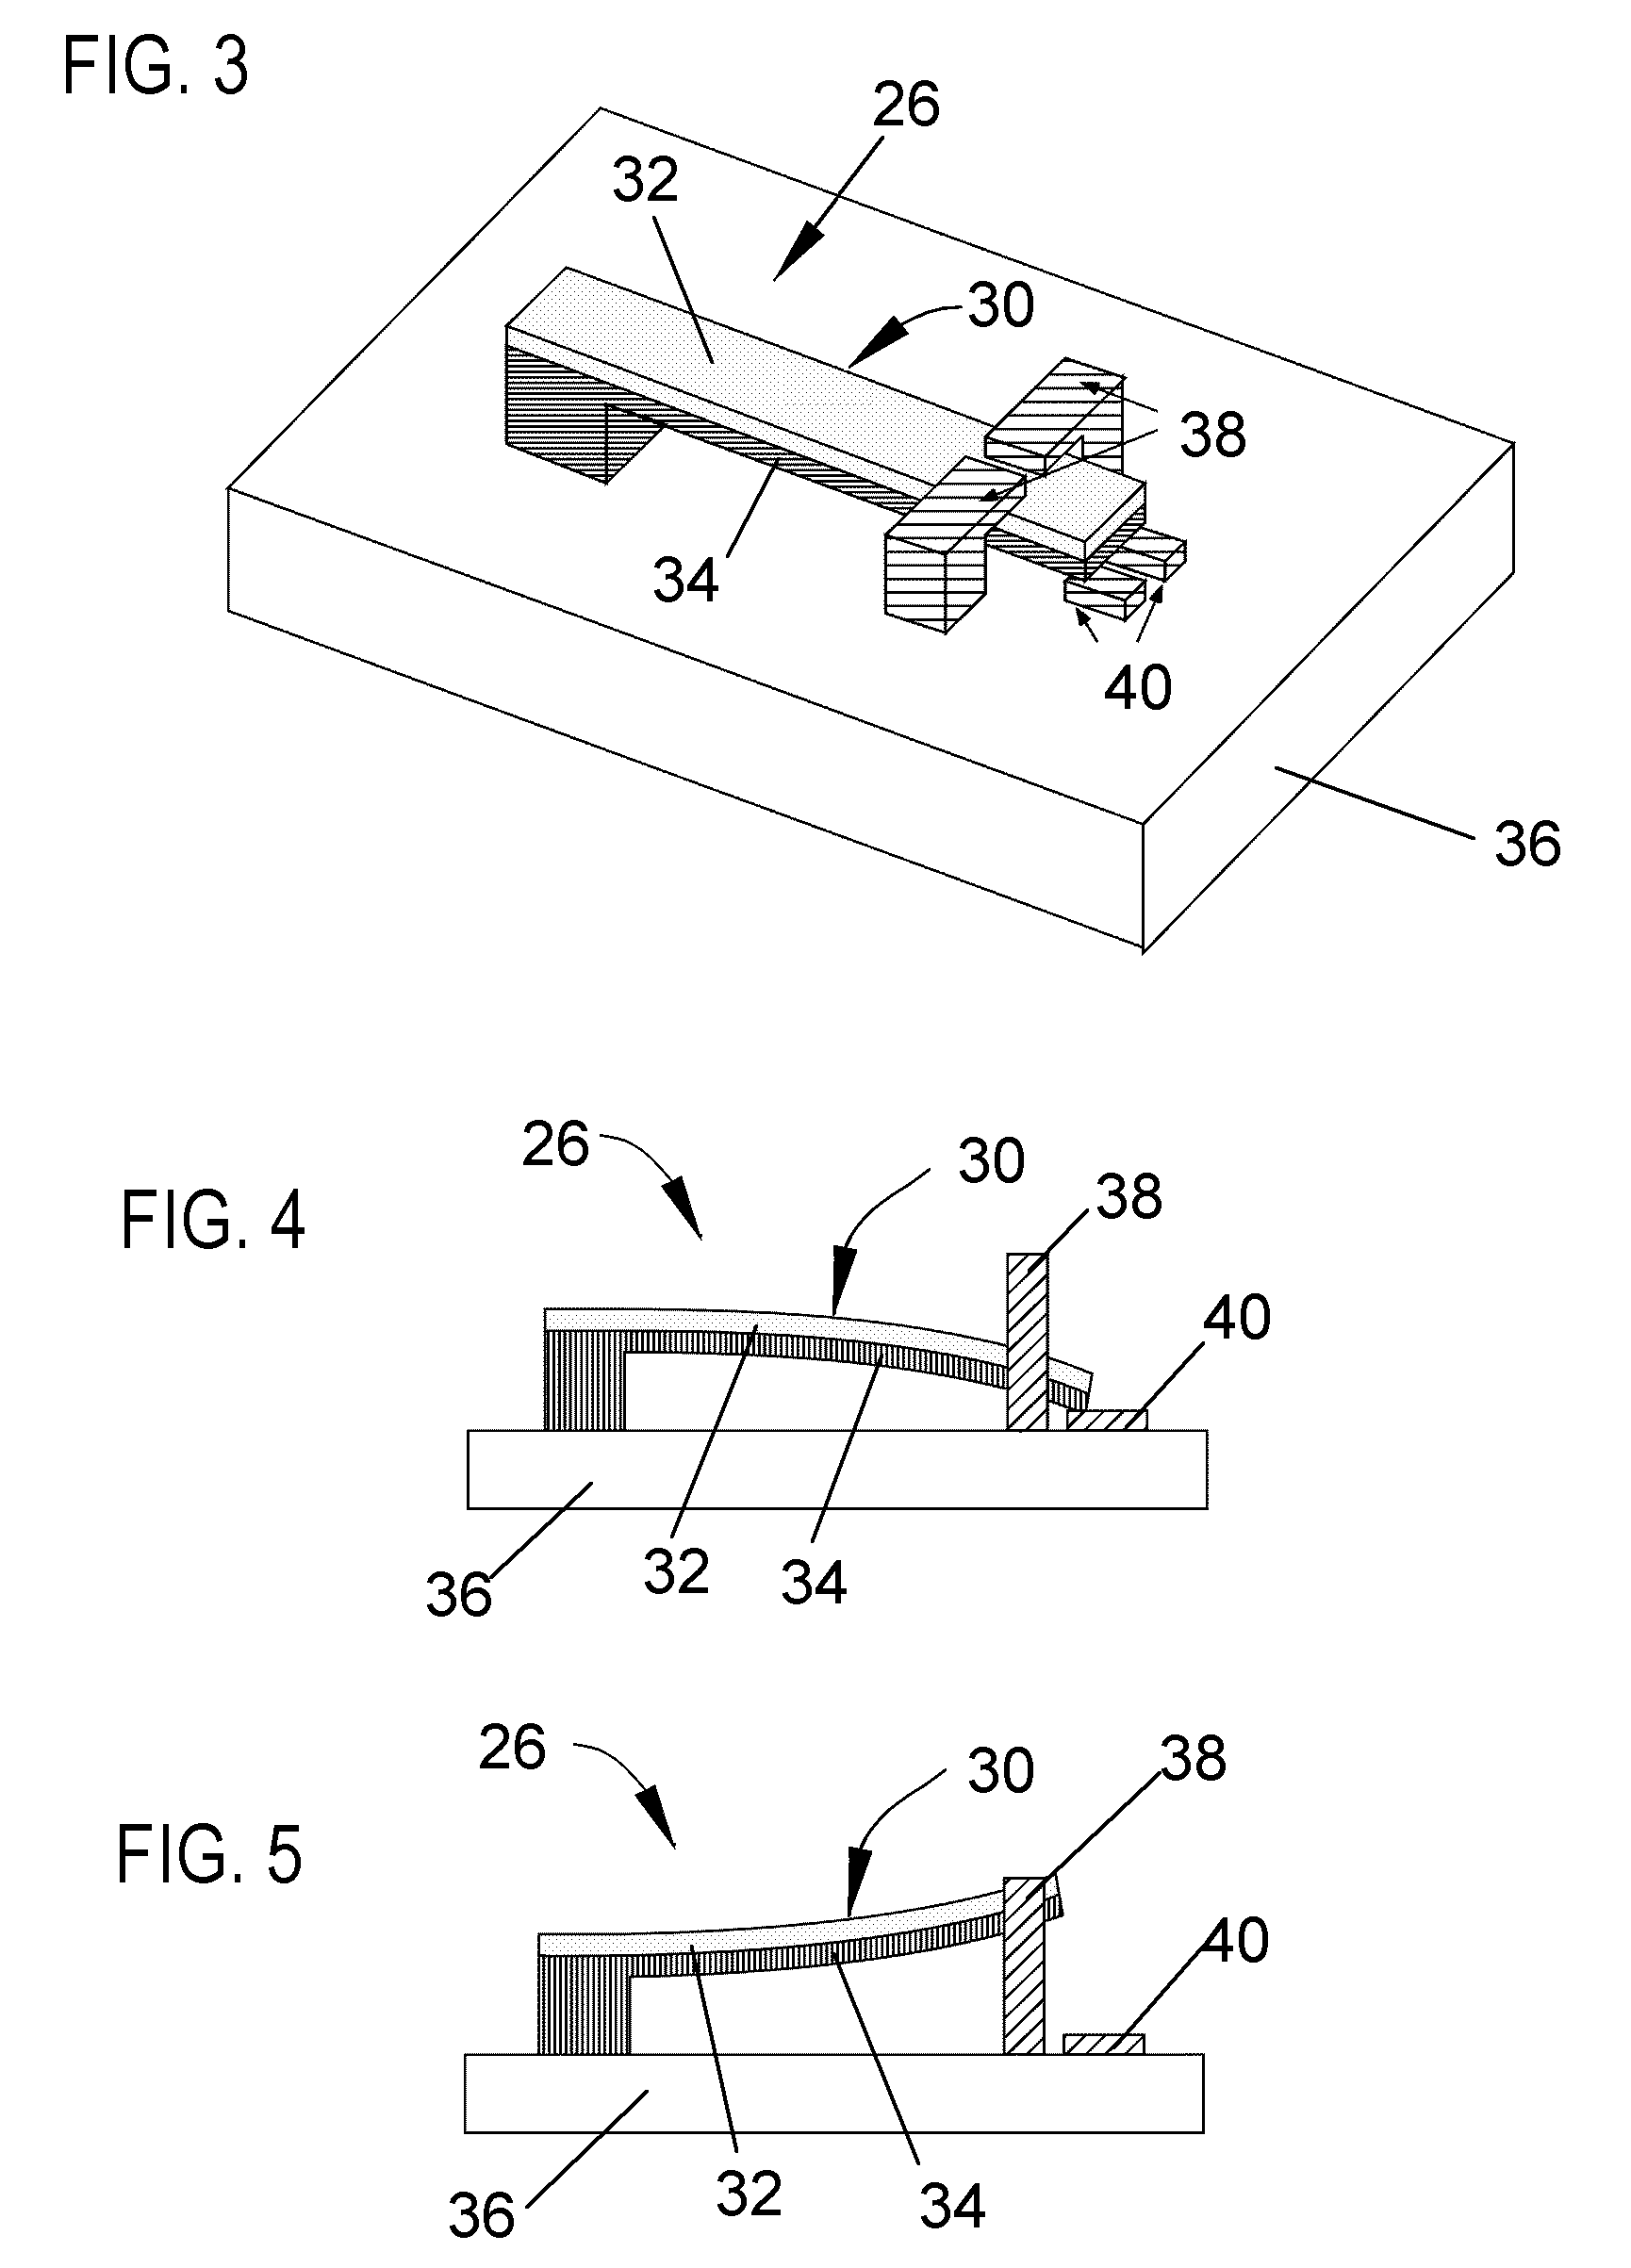 Method and system for monitoring environmental conditions